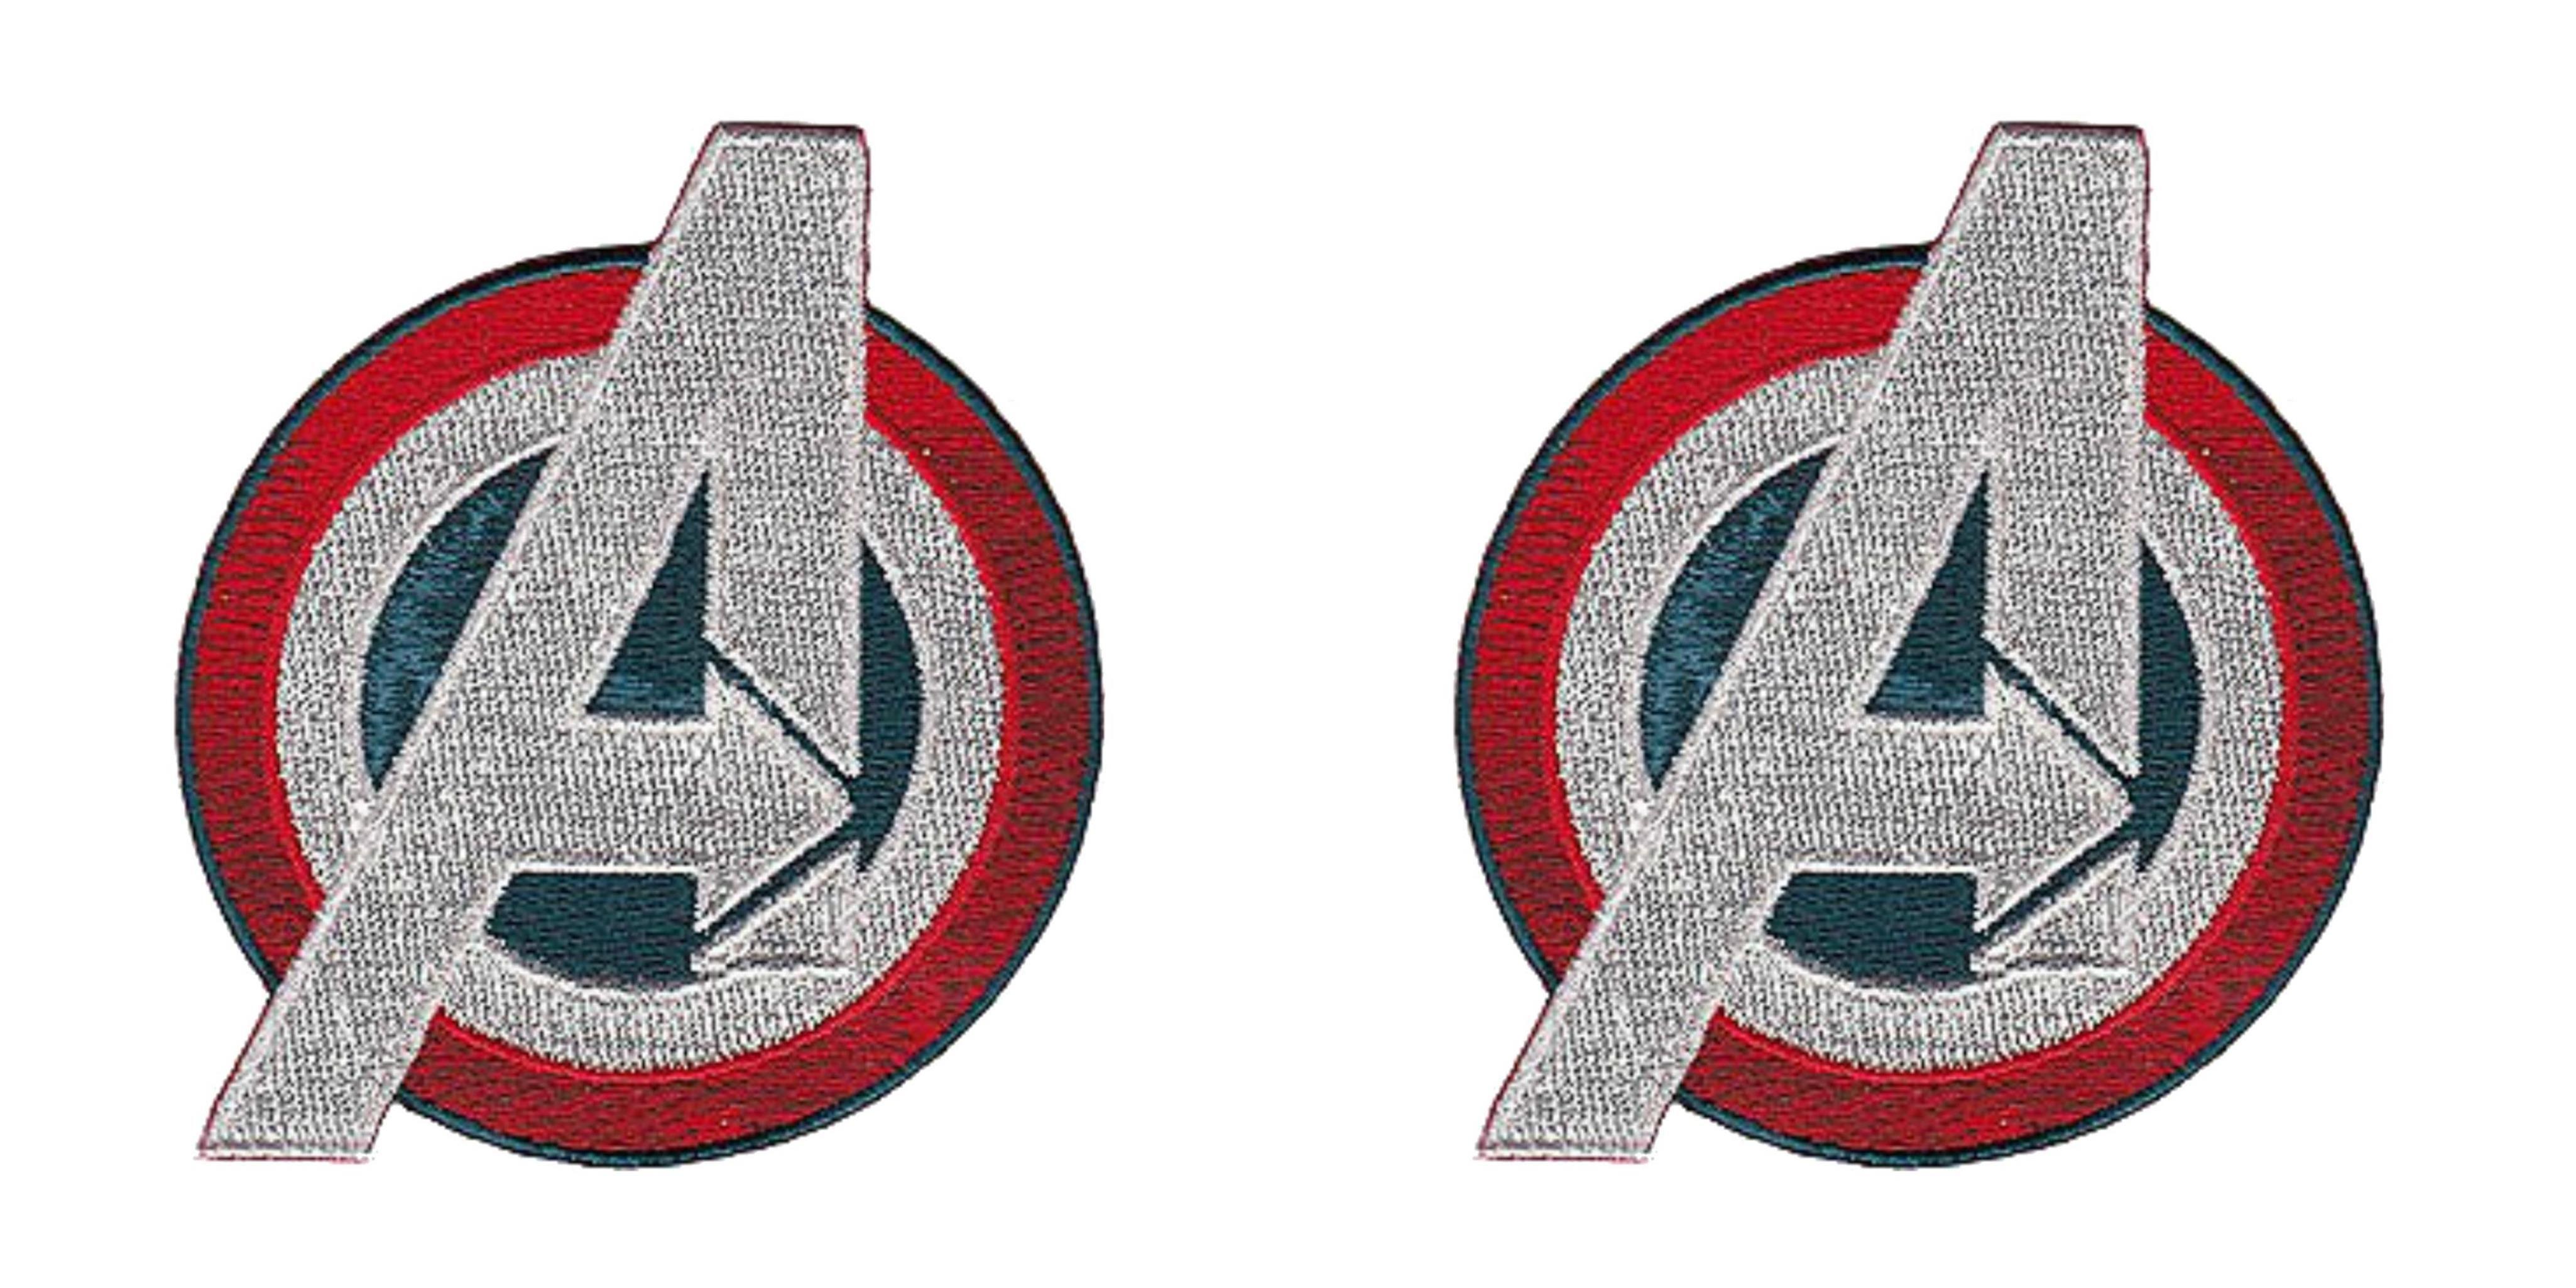 White with Blue Oval Logo - Superheroes Marvel Comics Avengers Red, White, and Blue Logo 3